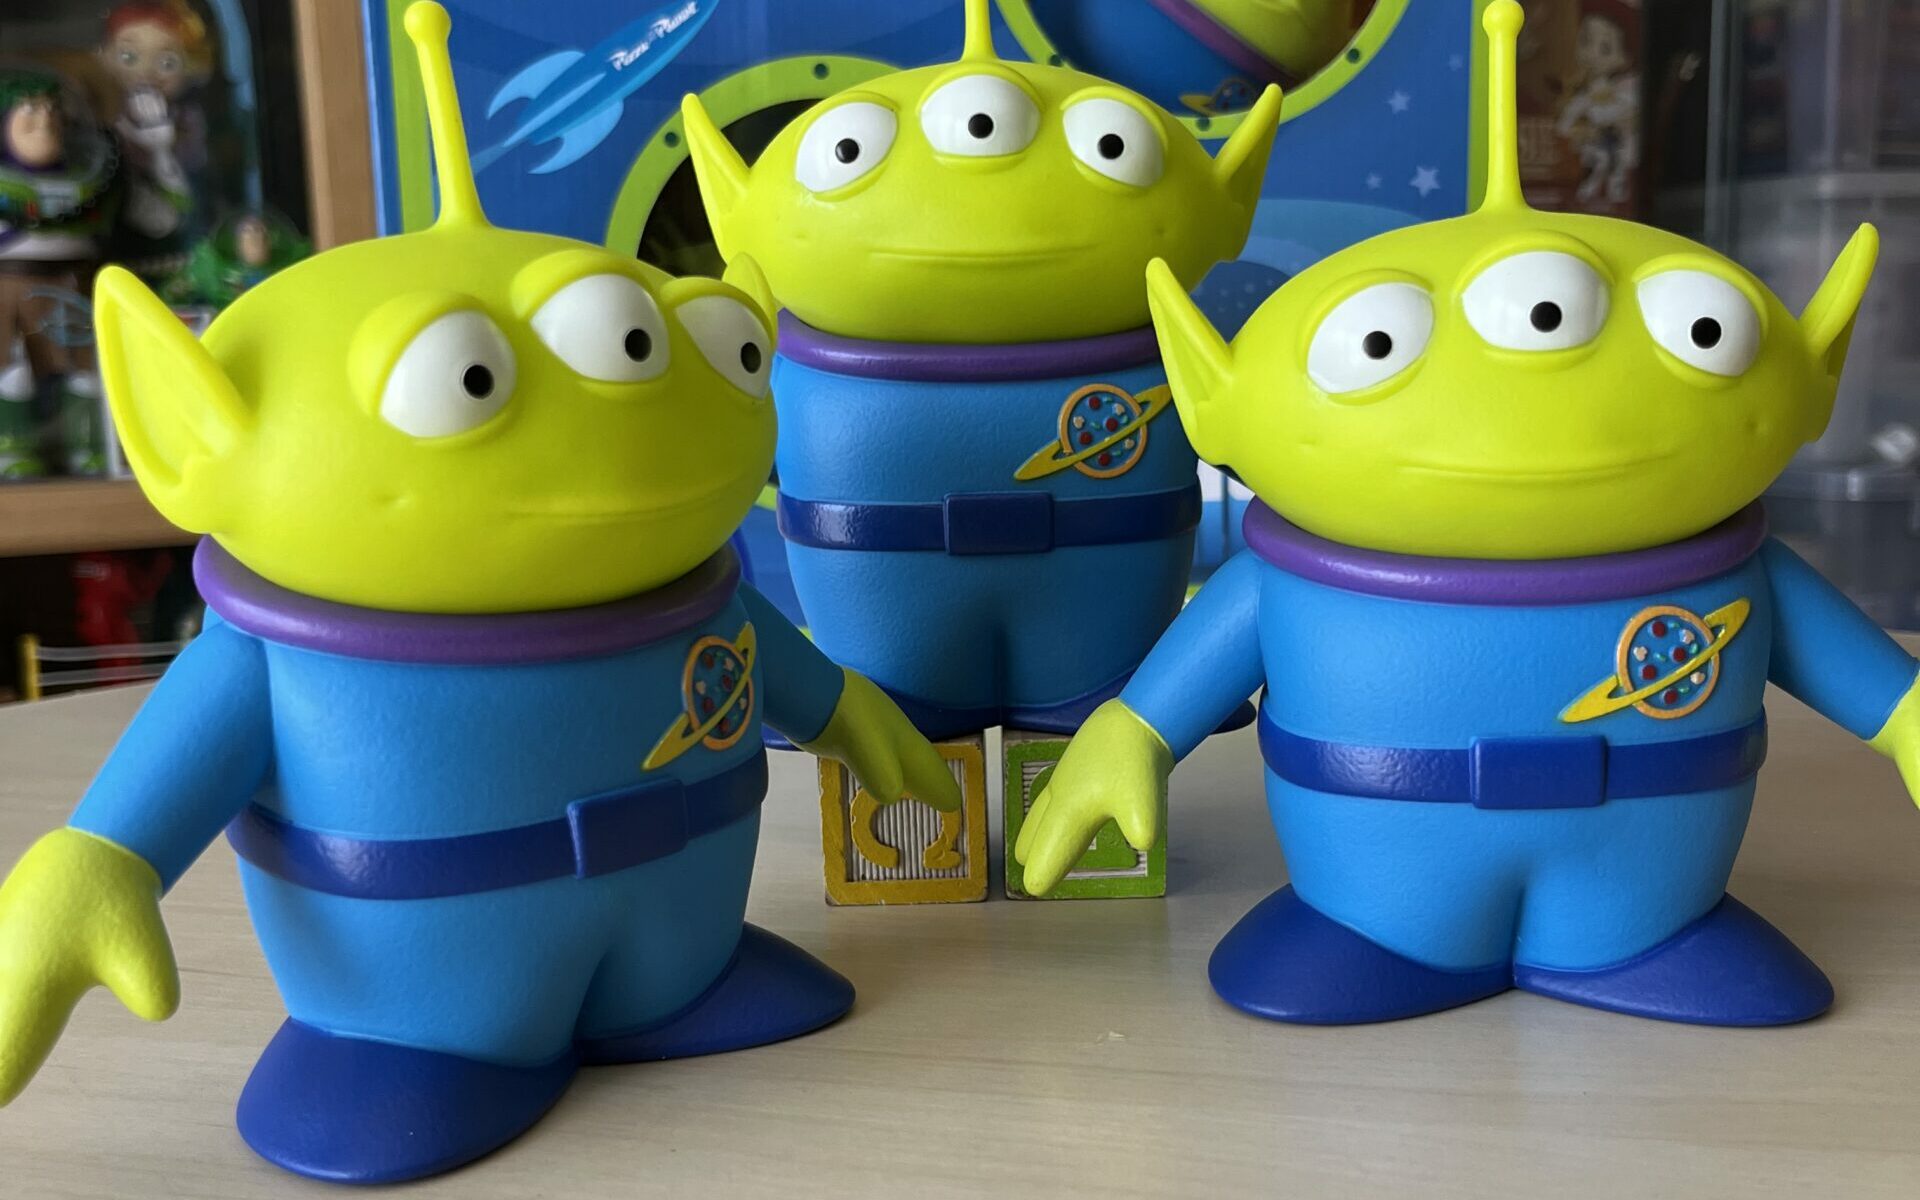 Fan-made replicas of the little green men from the "Toy Story" franchise.